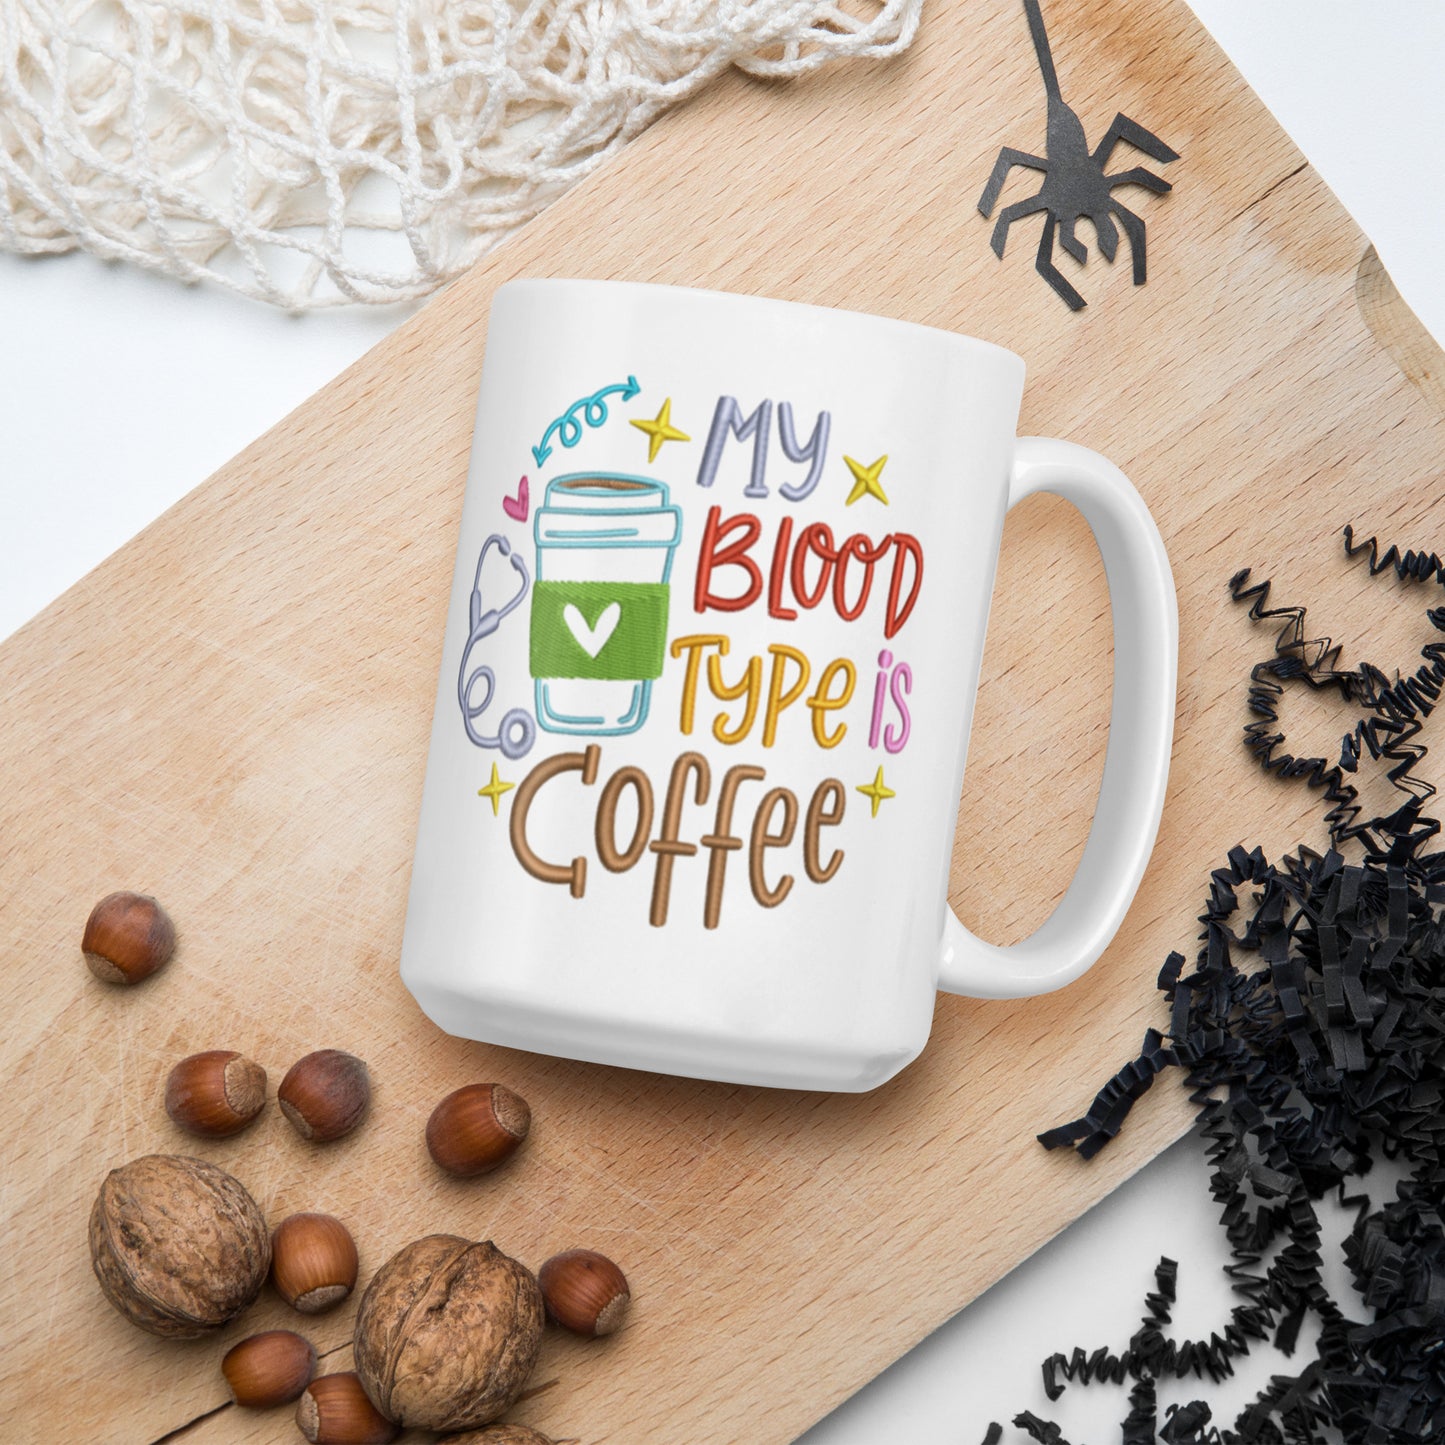 My Blood Type is coffee